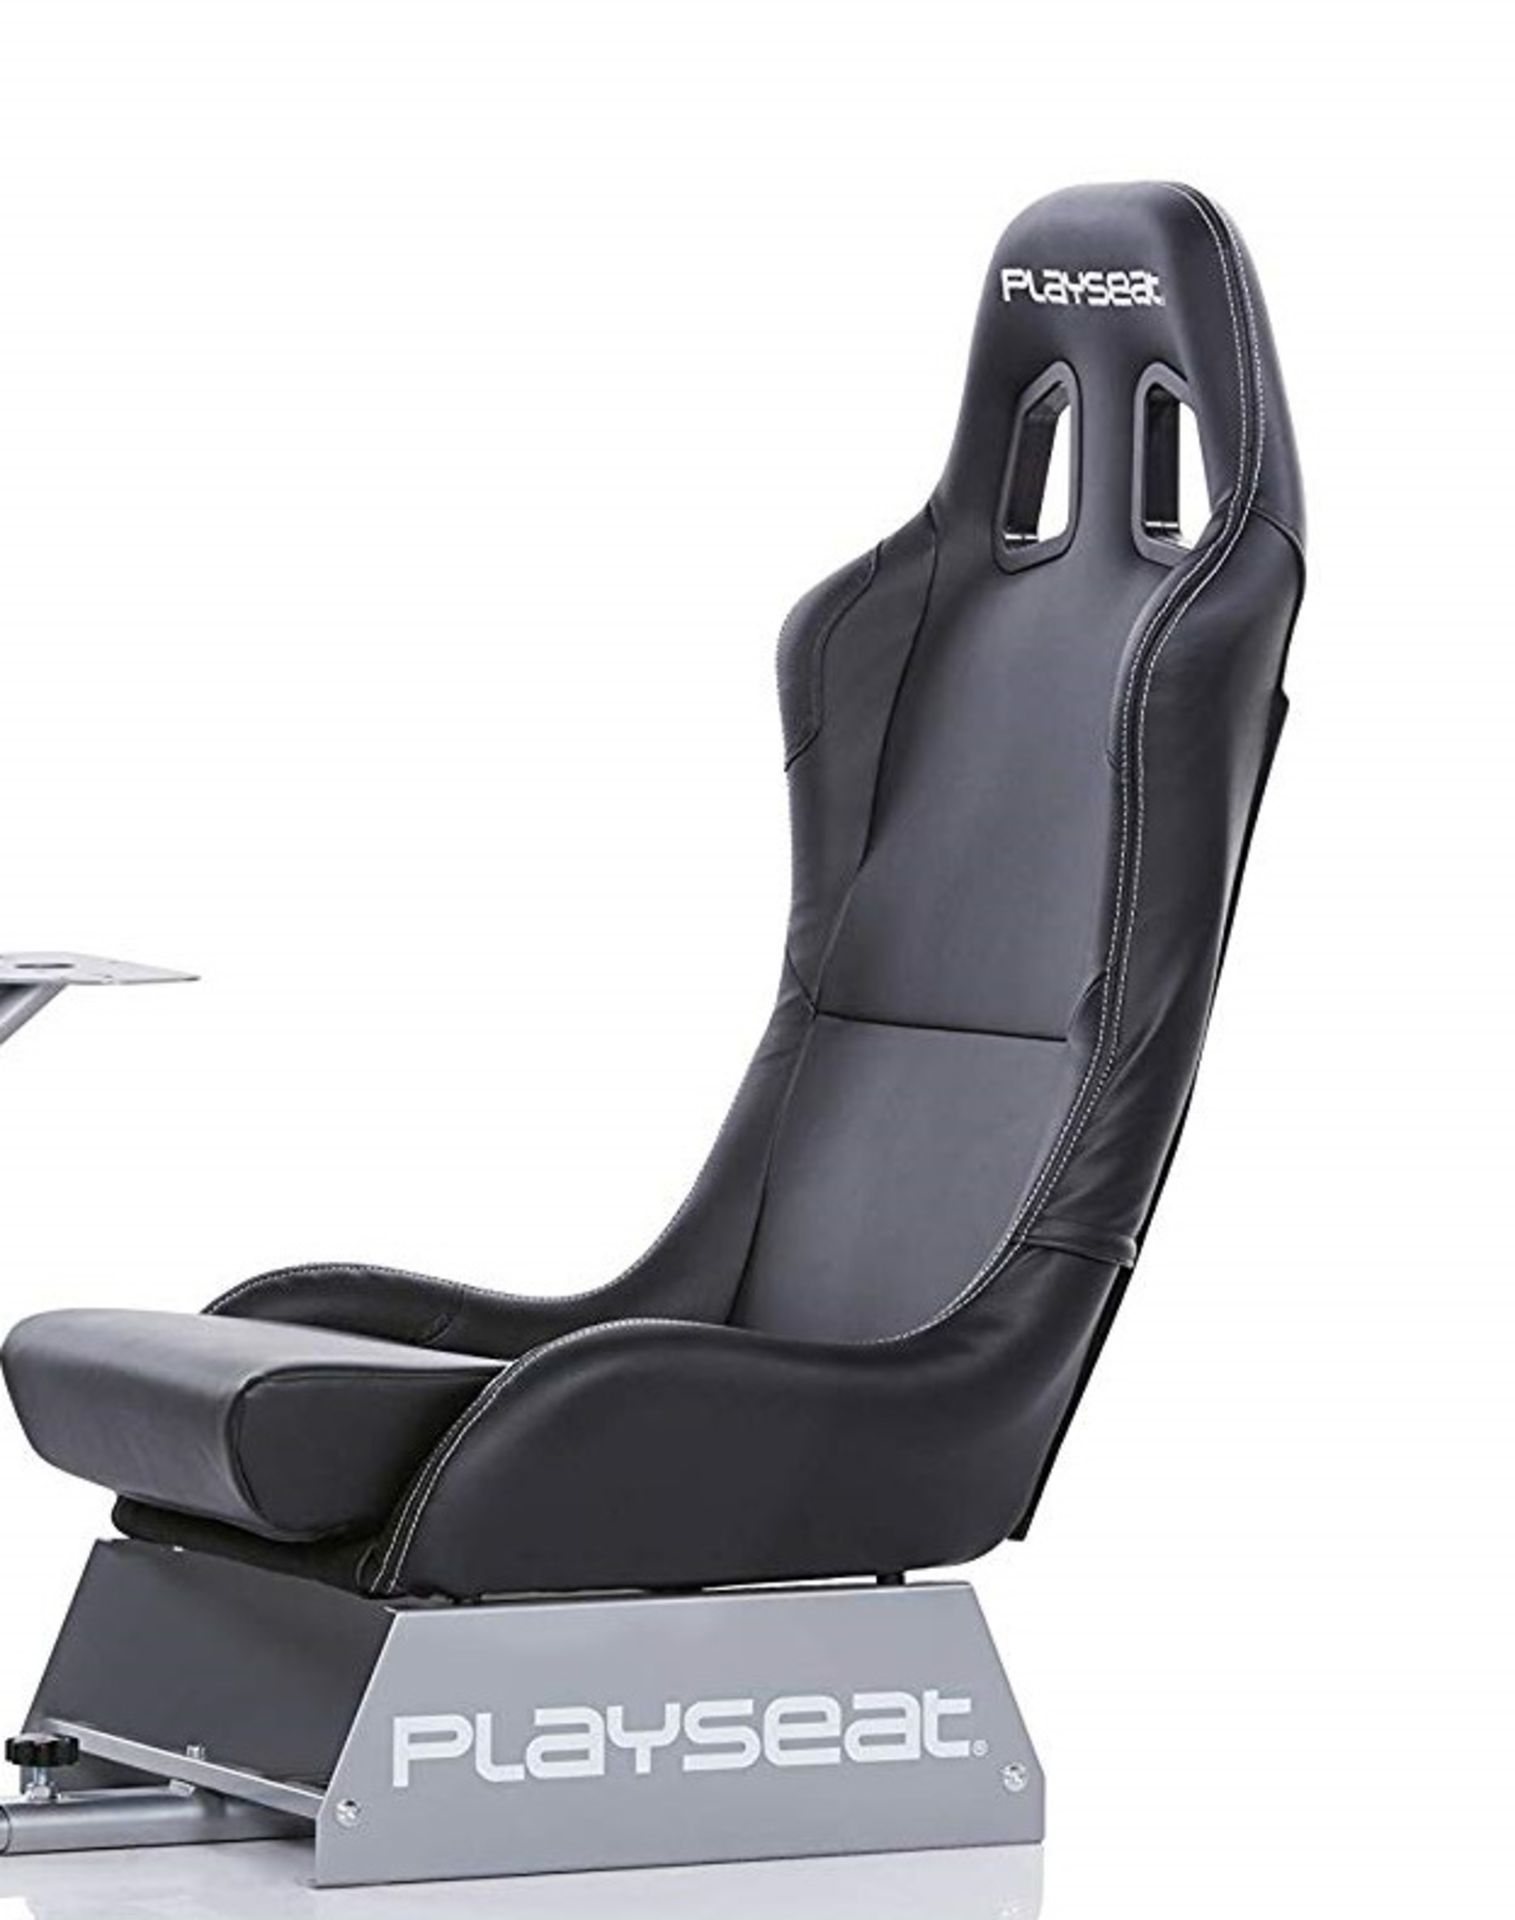 Playseat Gaming Chair - Black Faux Suede Finish | 8717496871961 | RRP £256.90